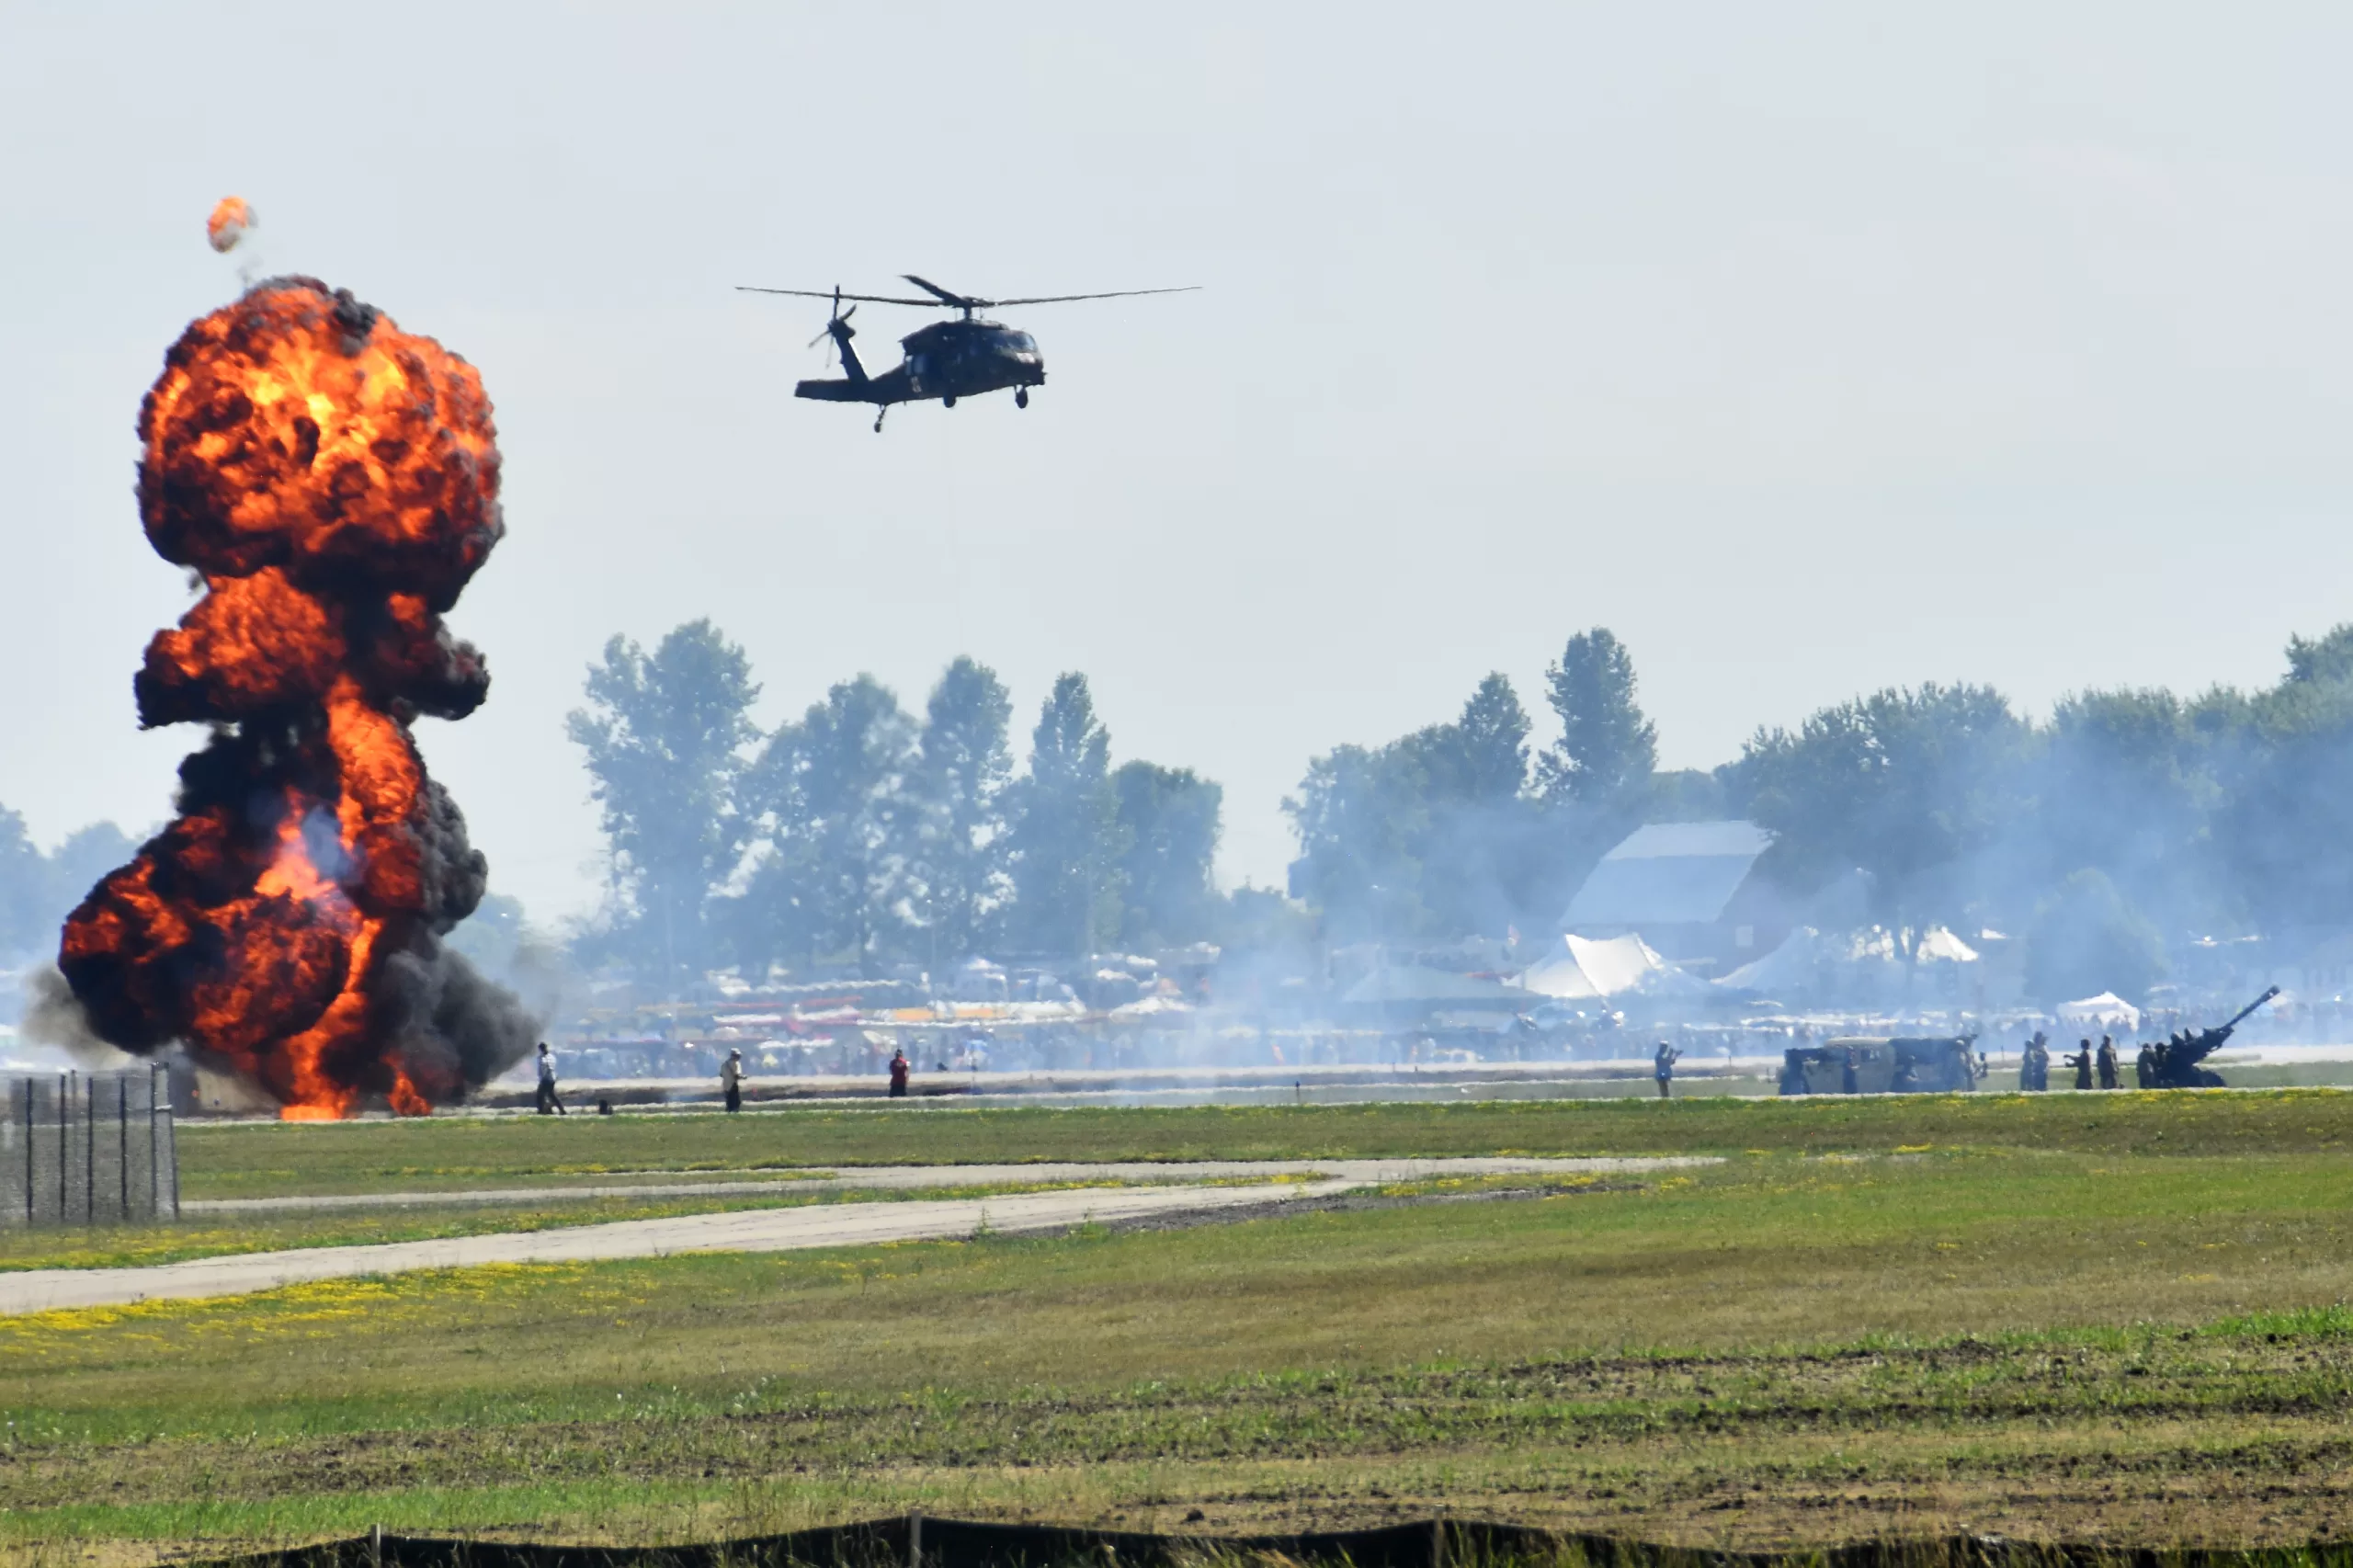 A UH-60 Black Hawk helicopter from the Wisconsin Army National Guard’s 1st Battalion, 147th Aviation Regiment moves past a burst of ground pyrotechnics at Wittman Regional Airport July 28 as part of a Wisconsin National Guard warfighting capabilities demonstration during the Experimental Aircraft Association’s AirVenture in Oshkosh, Wis. The demonstration included the F-35 Lightning fighter jet from the 115th Fighter Wing, a KC-135 Stratotanker from the 128th Air Refueling Wing, UH-60 Black Hawk helicopters from the 1st Battalion, 147th Aviation Regiment performing an air assault with Soldiers from the 2nd Battalion, 127th Infantry Regiment as well as a medevac patient hoist, and 105-mm howitzer firing demonstrations by members of the 1st Battalion, 120th Field Artillery Regiment. Pyrotechnics on the ground and narration by EAA staff made the demonstration even more memorable for EAA attendees. Wisconsin Department of Military Affairs photo by Vaughn R. Larson